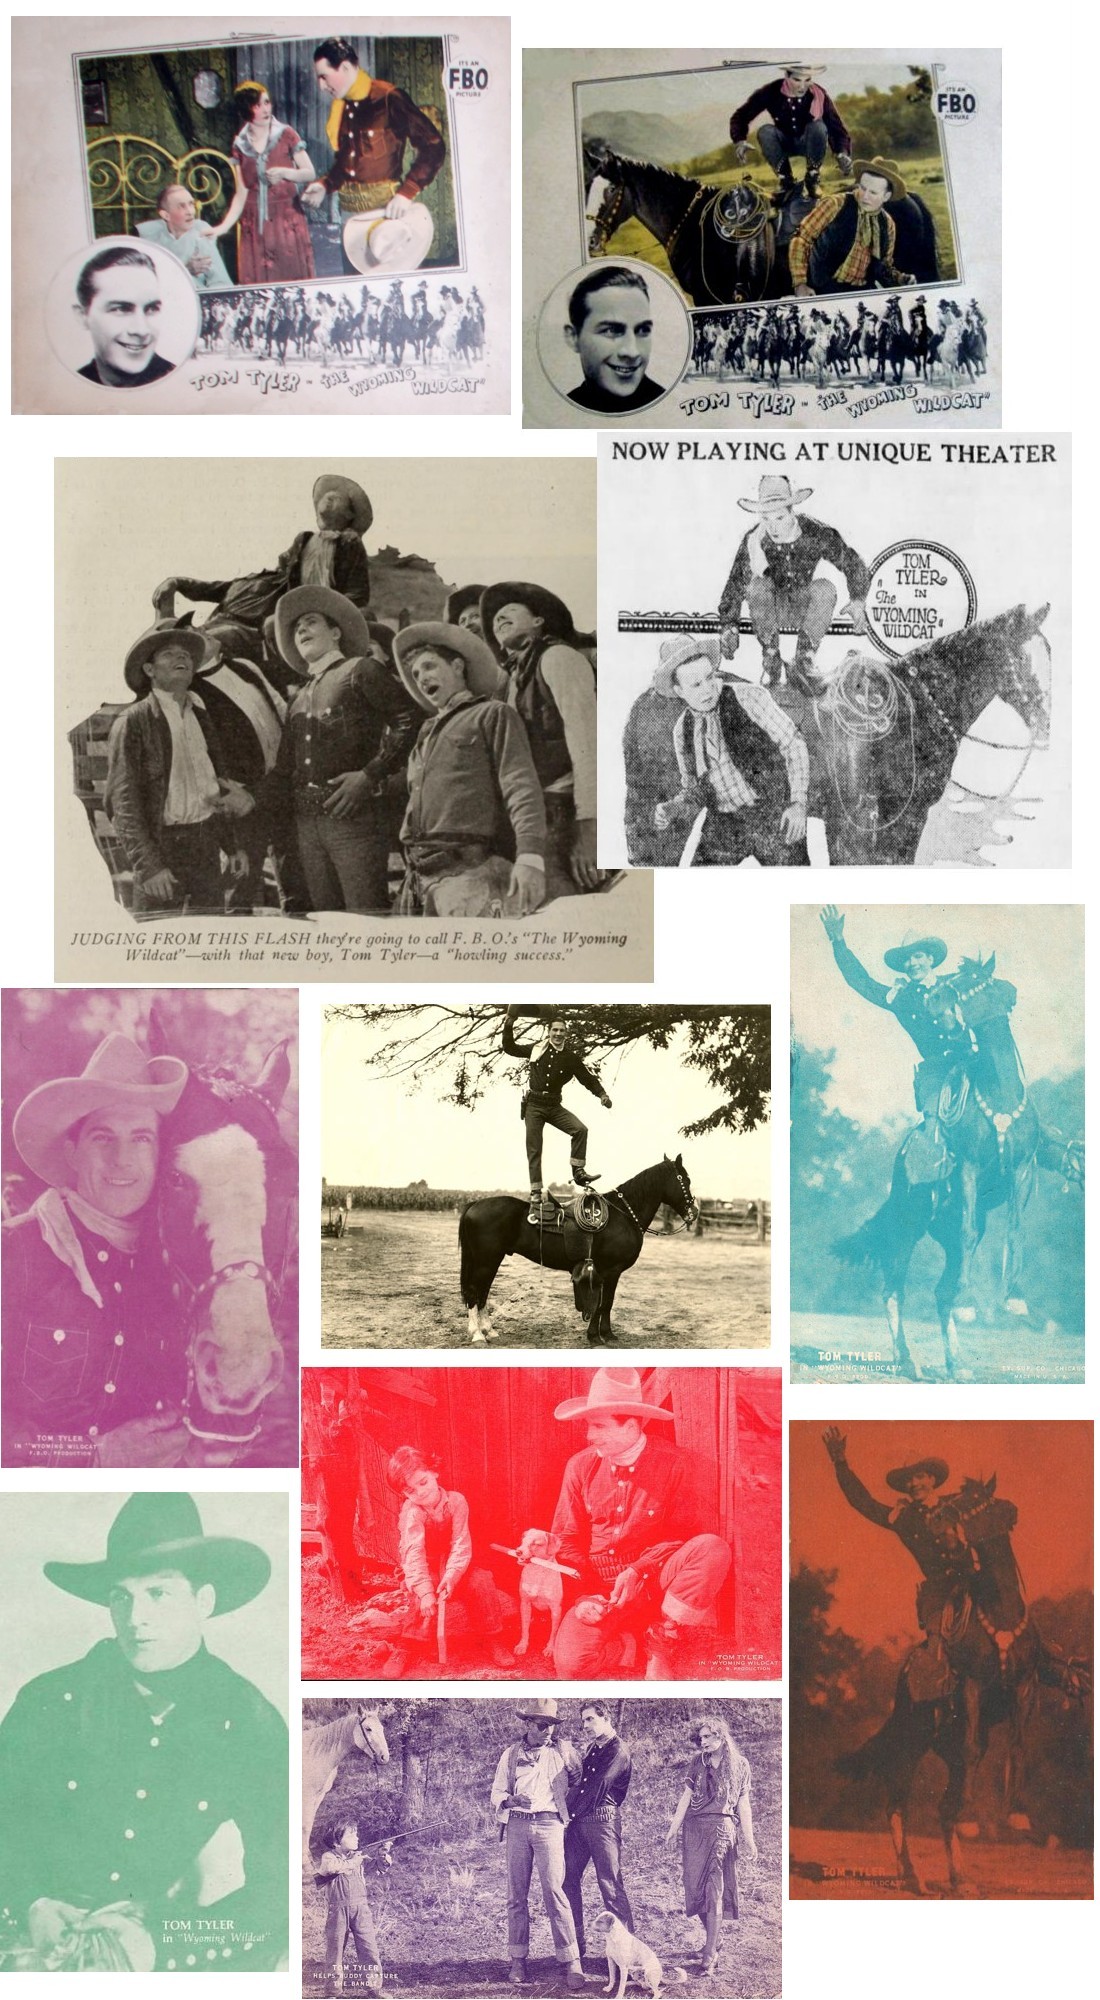 The Wyoming Wildcat lobby cards and film stills